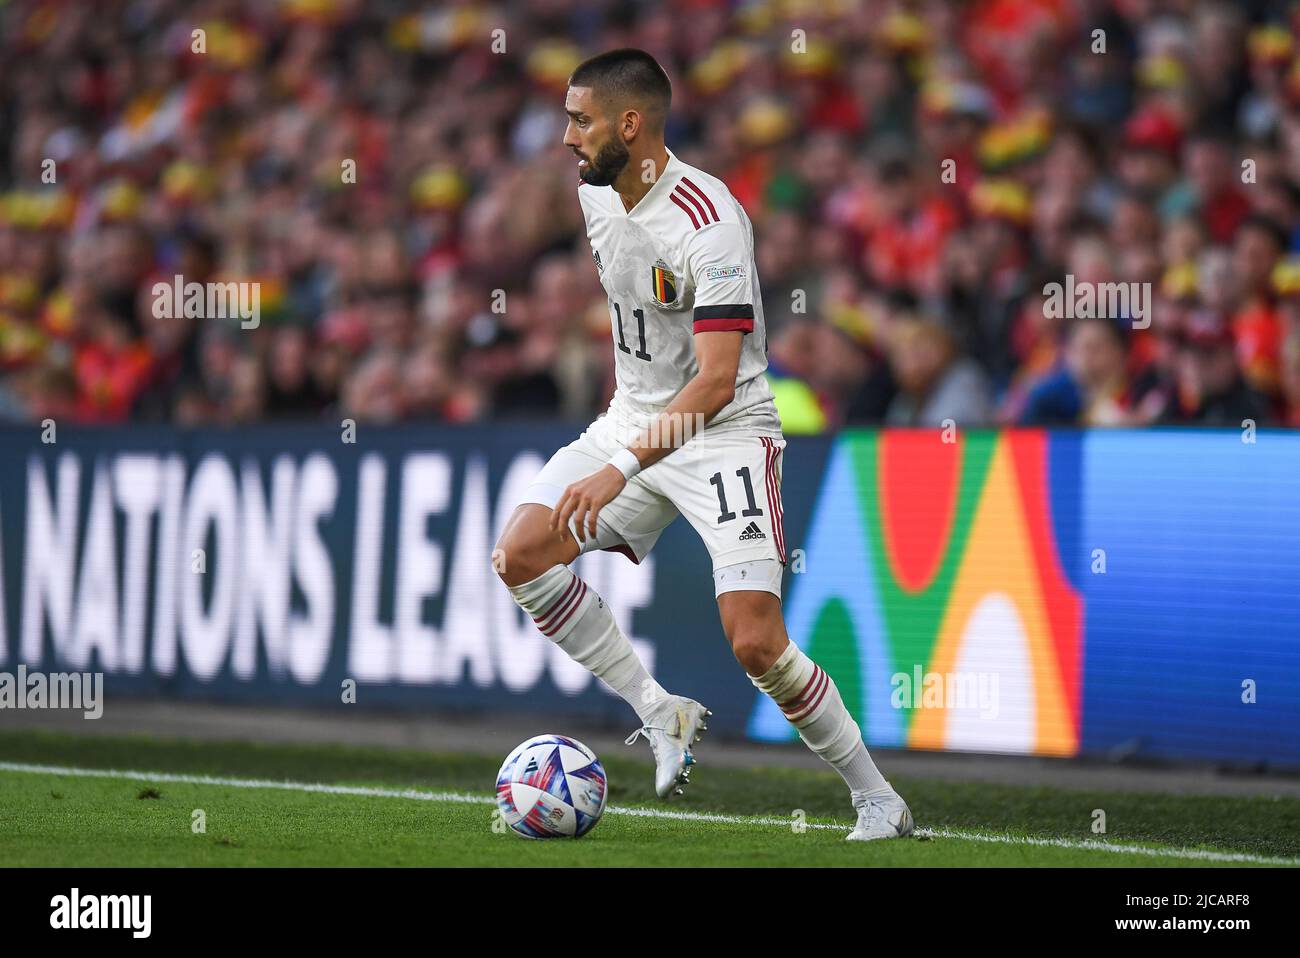 Cardiff, UK. 11th June, 2022. Yannick Carrasco of Belgium, in action during the game Credit: News Images /Alamy Live News Stock Photo